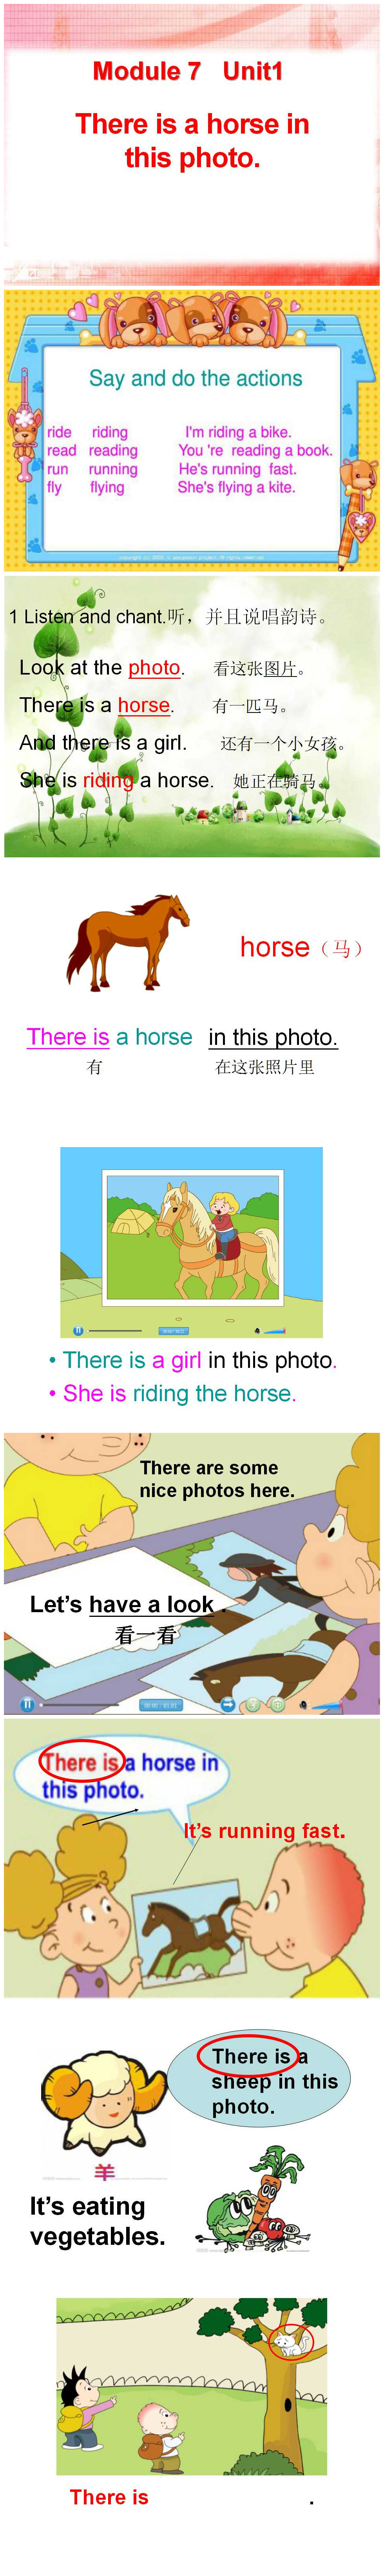 《There is a horse in this photo》PPT课件3PPT课件下载